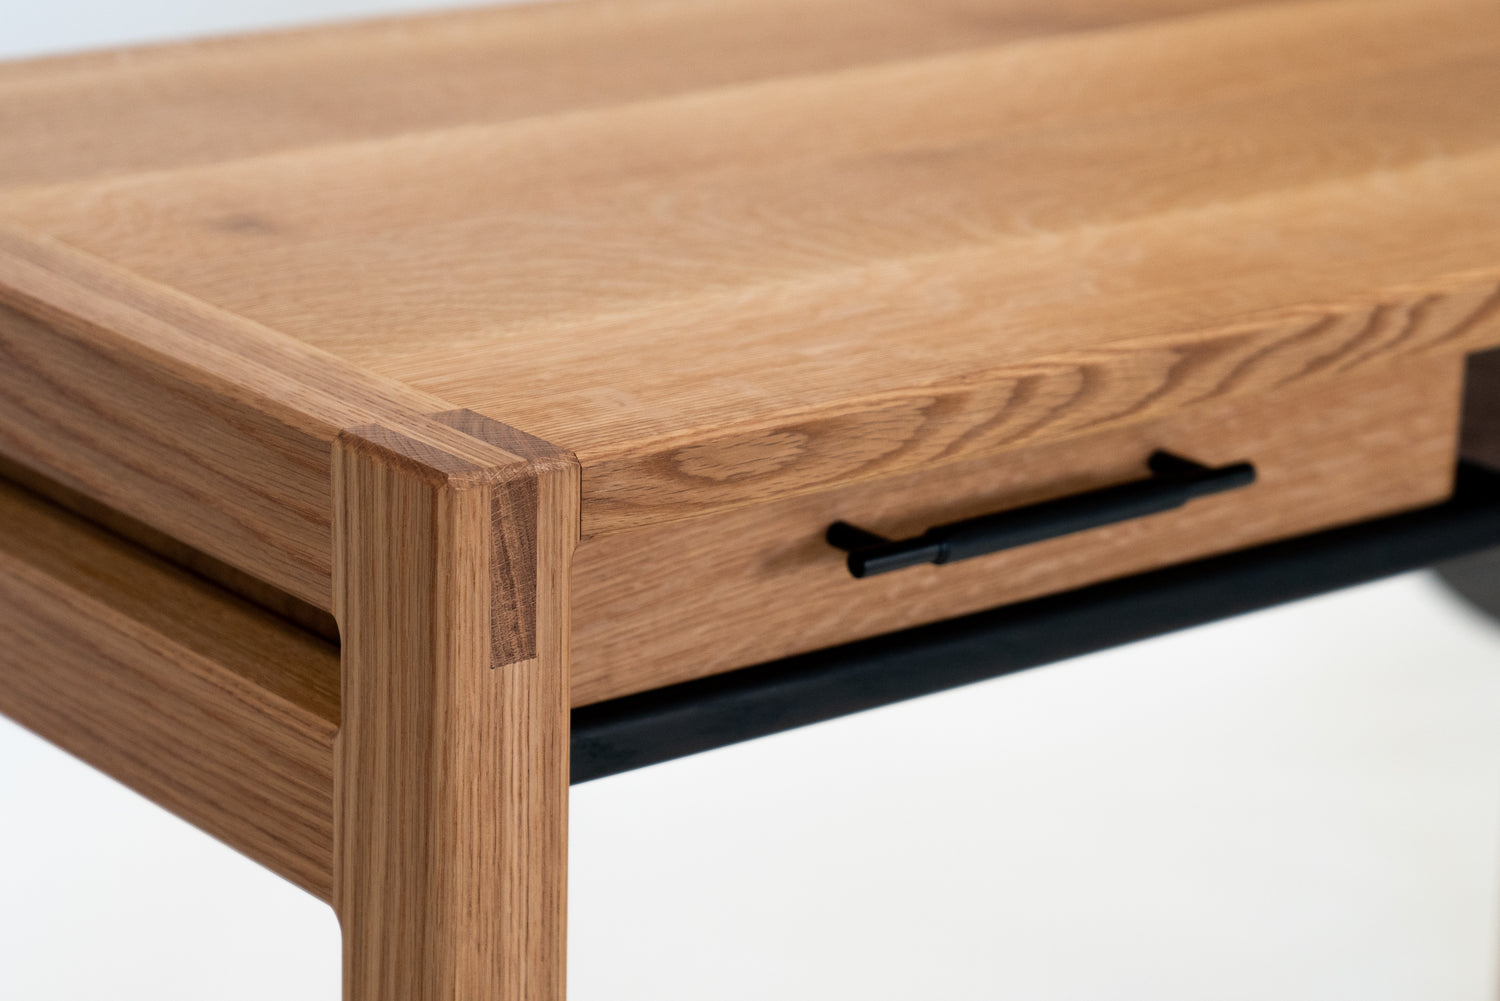 Front corner view of the Kamehana Desk built in White Oak with Black Knurled Drawer Pull